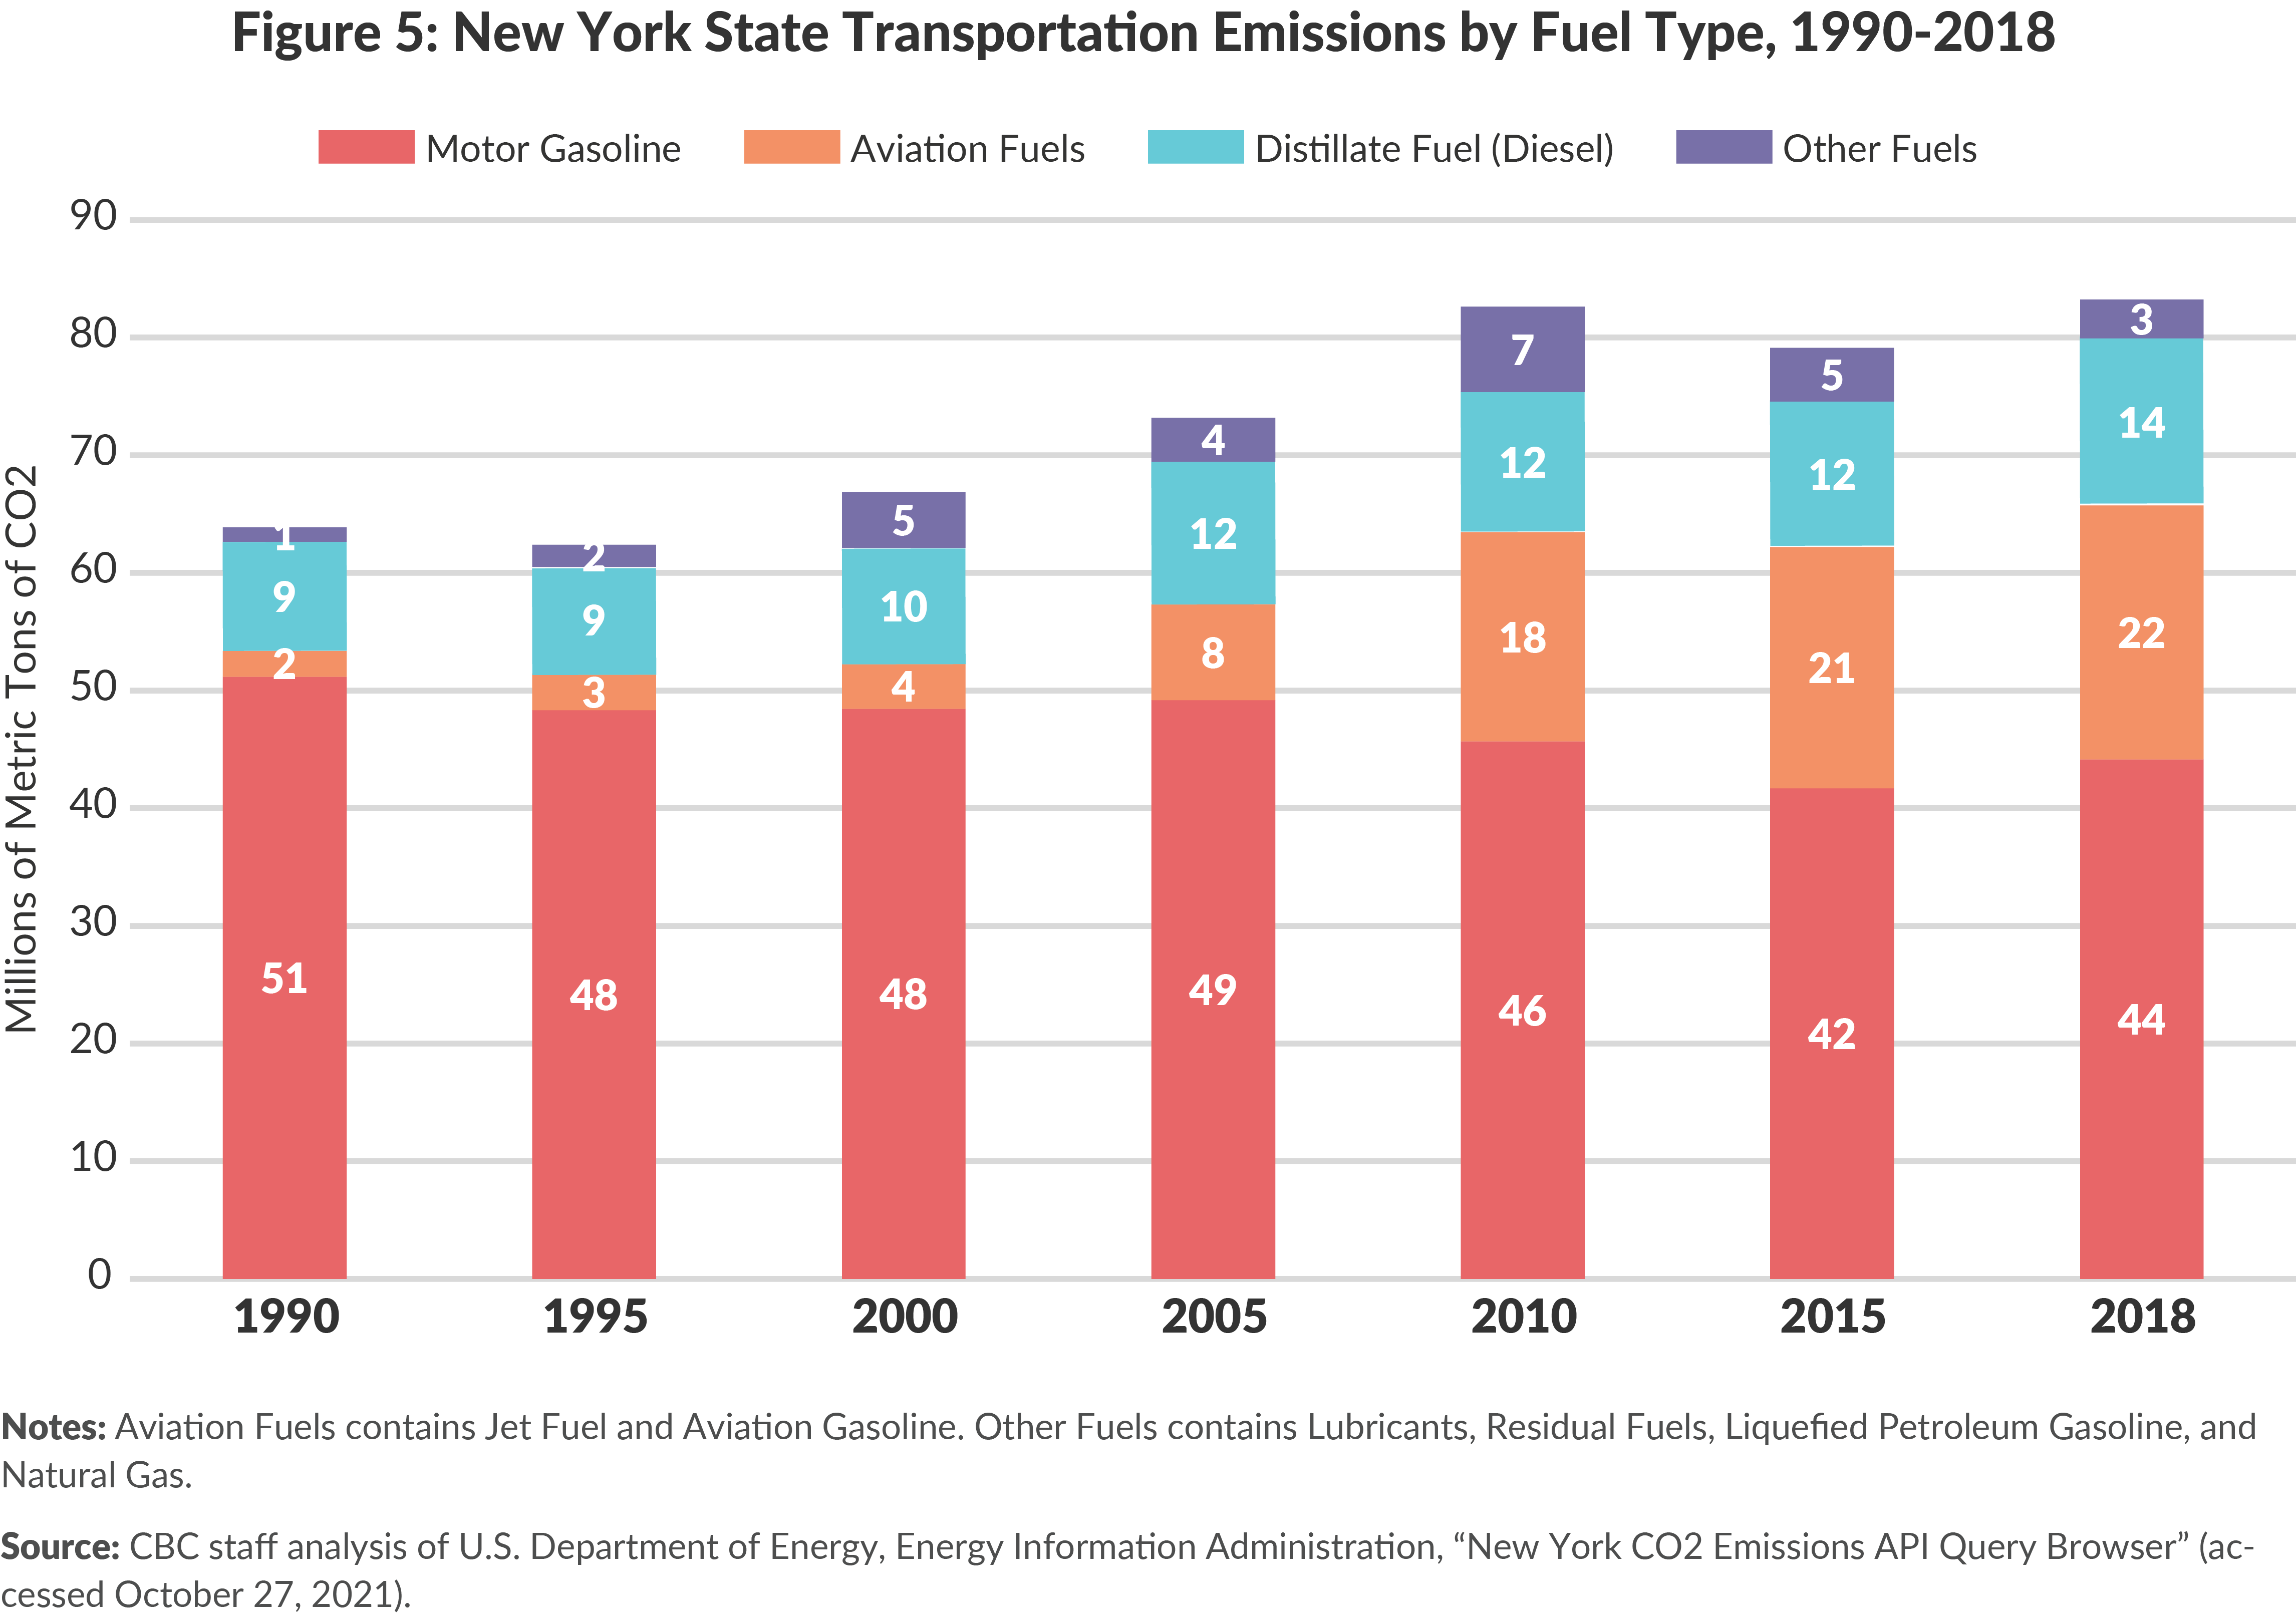 Figure 5: New York State Transportation Emissions by Fuel Type, 1990-2018